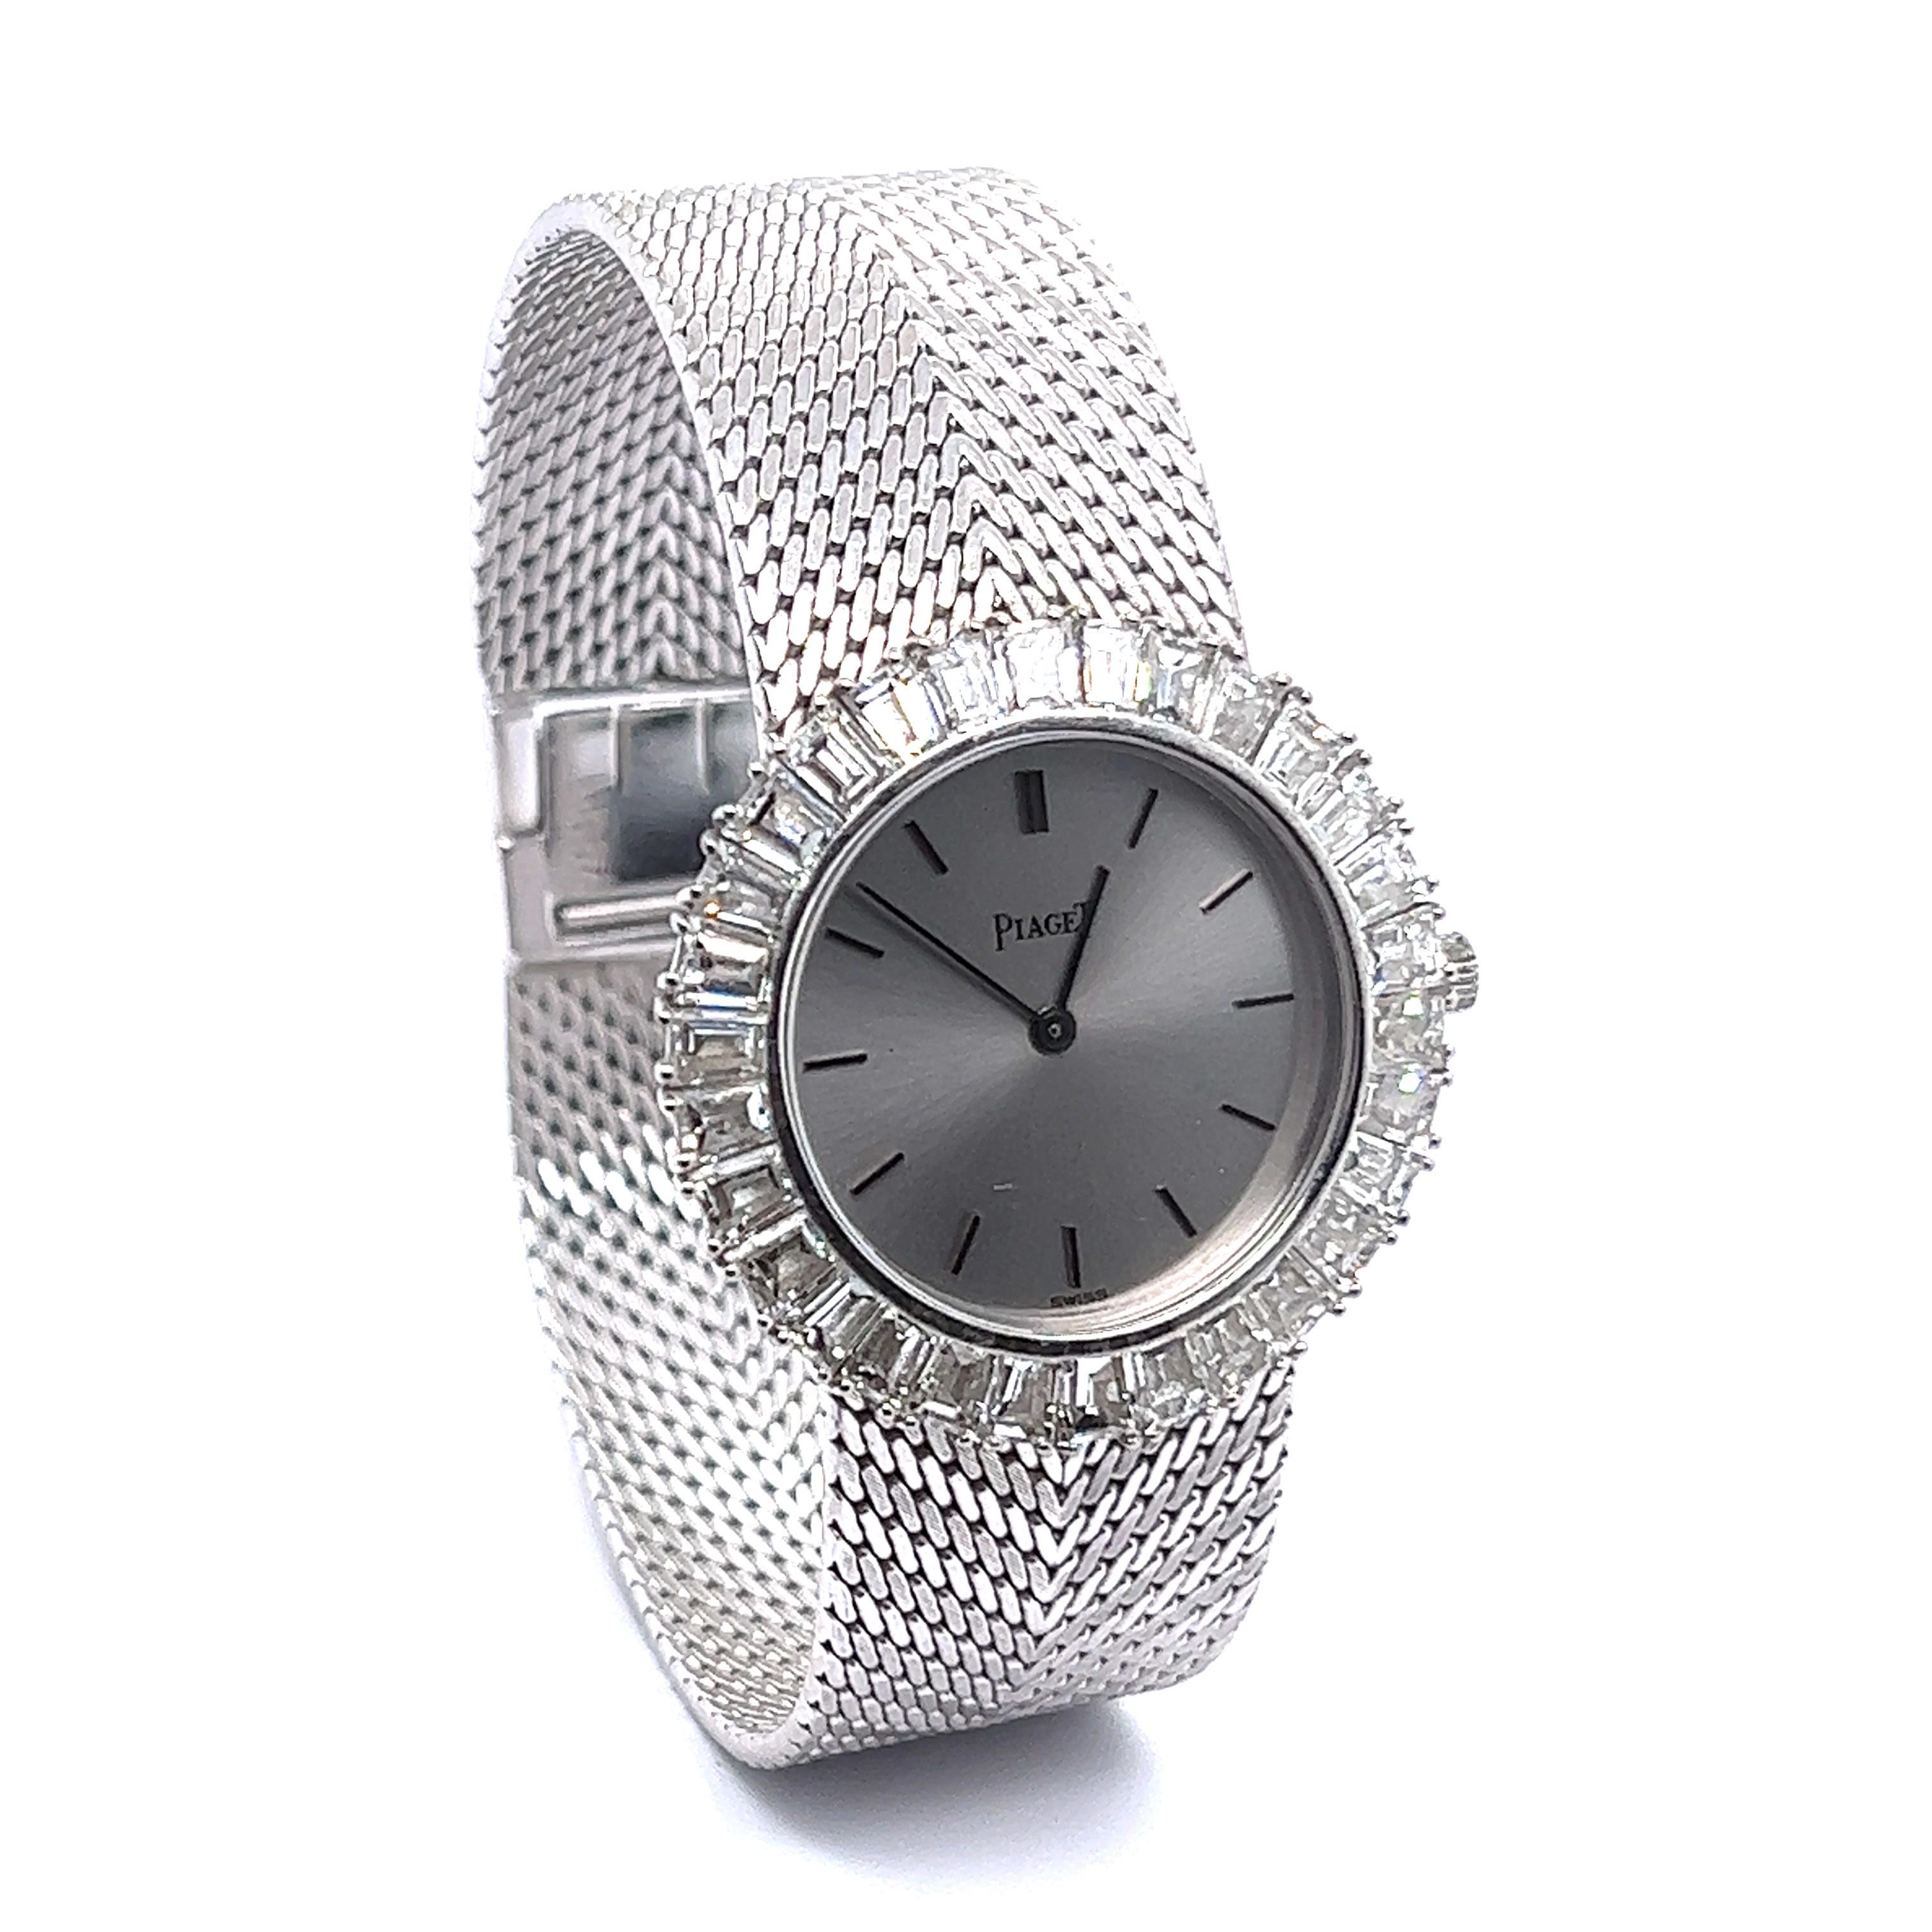 Fine Piaget lady’s cocktail watch crafted in 18 Karat white gold. The bezel is set with an entourage consisting of 30 tapered baguette-cut diamonds totalling approximate 5.50 ct. Fine white gold milanaise bracelet with jewellery style clasp in 18